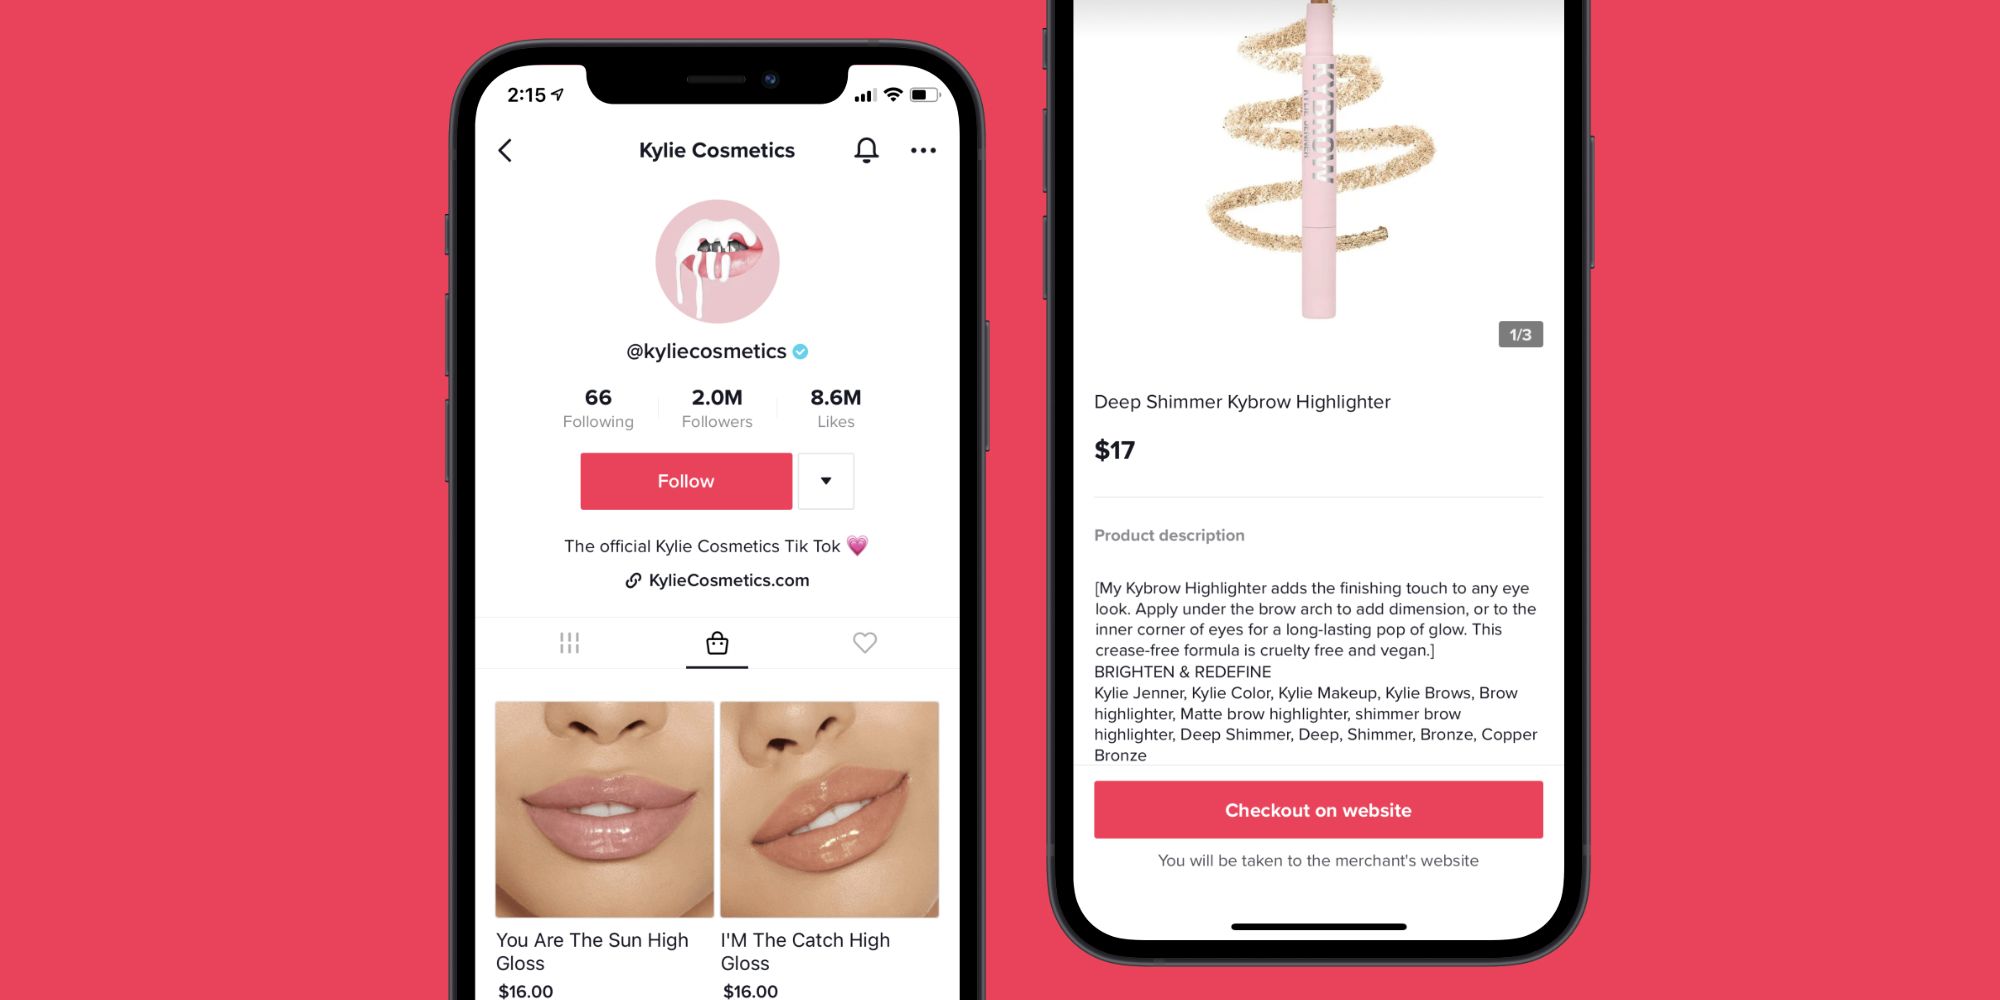 The new TikTok shop - What you need to know